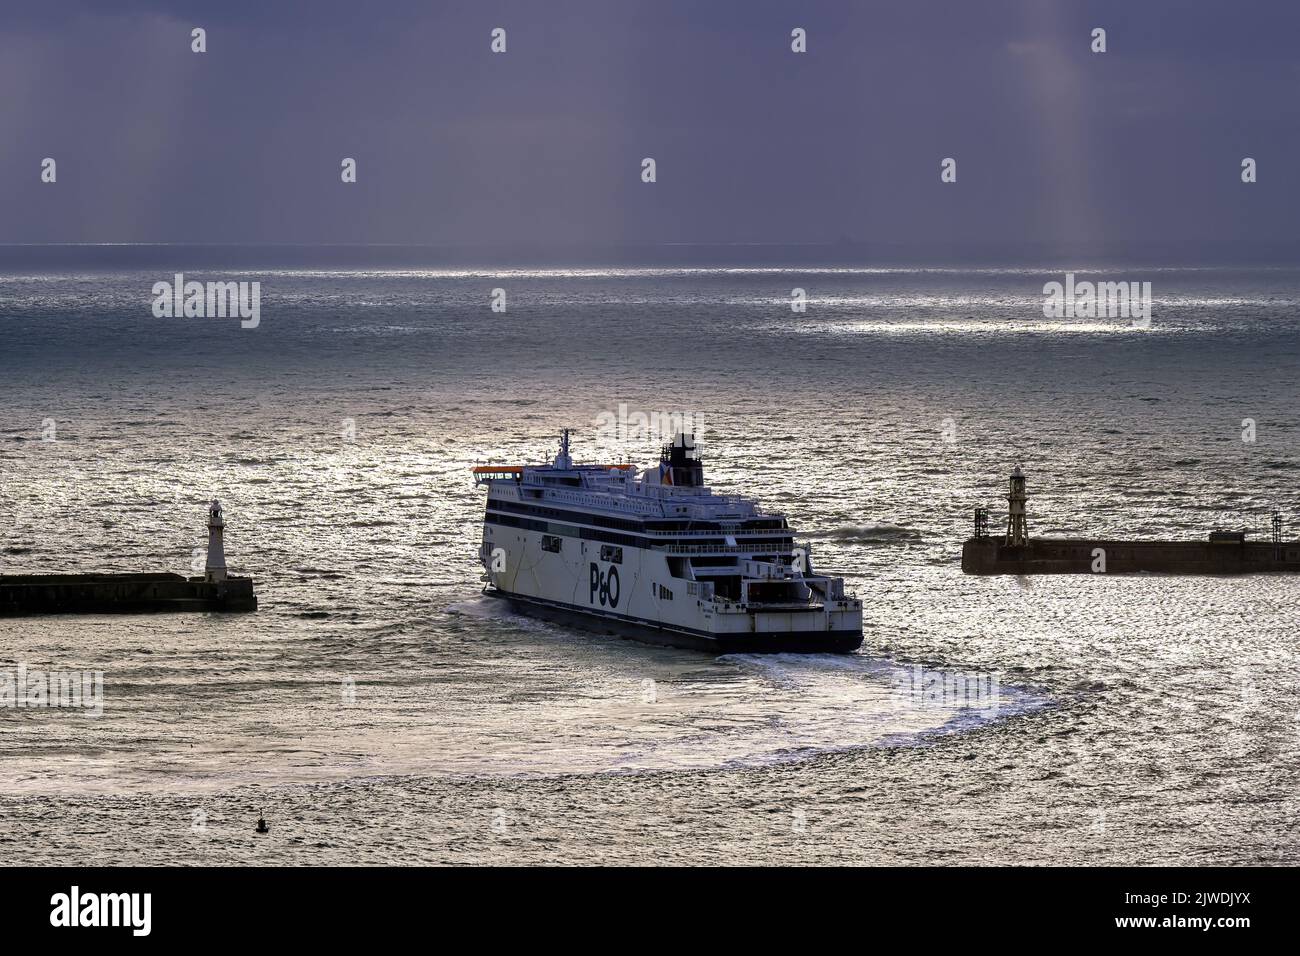 The cross-Channel ferry Spirit of Britain (P&O Ferries) exits the Port of Dover by the western entrance. Stock Photo